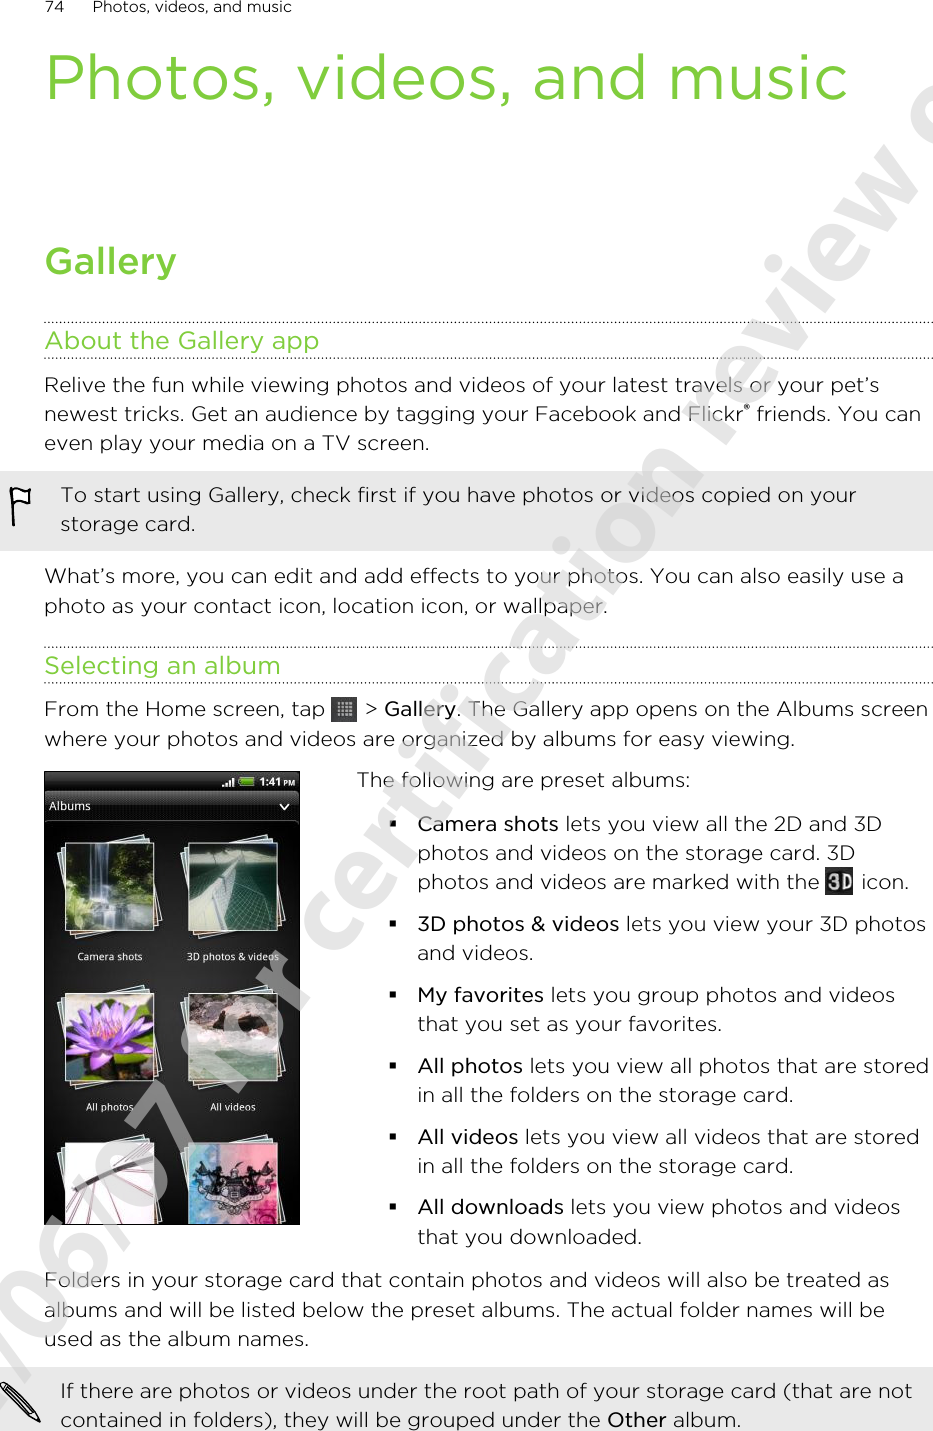 Photos, videos, and musicGalleryAbout the Gallery appRelive the fun while viewing photos and videos of your latest travels or your pet’snewest tricks. Get an audience by tagging your Facebook and Flickr® friends. You caneven play your media on a TV screen.To start using Gallery, check first if you have photos or videos copied on yourstorage card.What’s more, you can edit and add effects to your photos. You can also easily use aphoto as your contact icon, location icon, or wallpaper.Selecting an albumFrom the Home screen, tap   &gt; Gallery. The Gallery app opens on the Albums screenwhere your photos and videos are organized by albums for easy viewing.The following are preset albums:§Camera shots lets you view all the 2D and 3Dphotos and videos on the storage card. 3Dphotos and videos are marked with the   icon.§3D photos &amp; videos lets you view your 3D photosand videos.§My favorites lets you group photos and videosthat you set as your favorites.§All photos lets you view all photos that are storedin all the folders on the storage card.§All videos lets you view all videos that are storedin all the folders on the storage card.§All downloads lets you view photos and videosthat you downloaded.Folders in your storage card that contain photos and videos will also be treated asalbums and will be listed below the preset albums. The actual folder names will beused as the album names.If there are photos or videos under the root path of your storage card (that are notcontained in folders), they will be grouped under the Other album.74 Photos, videos, and music2011/06/07 for certification review only